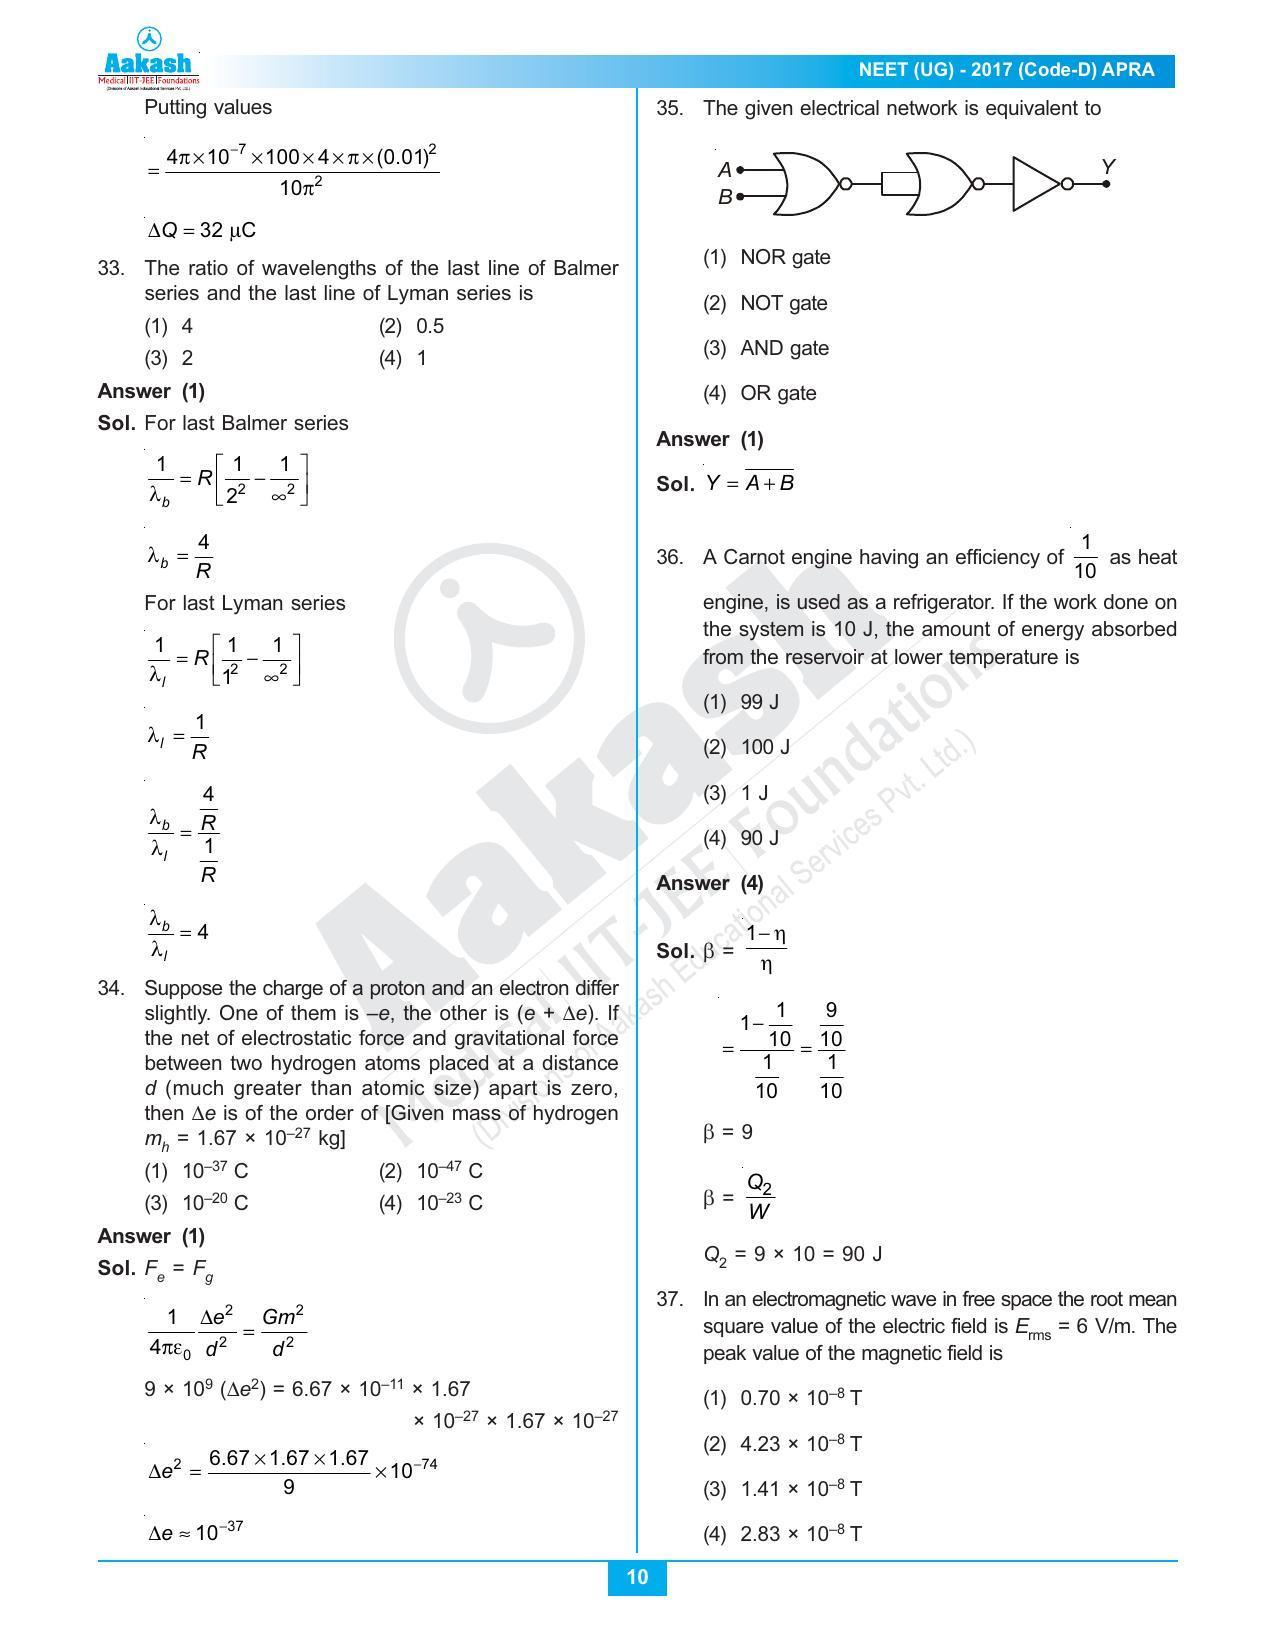  NEET Code D 2017 Answer & Solutions - Page 10